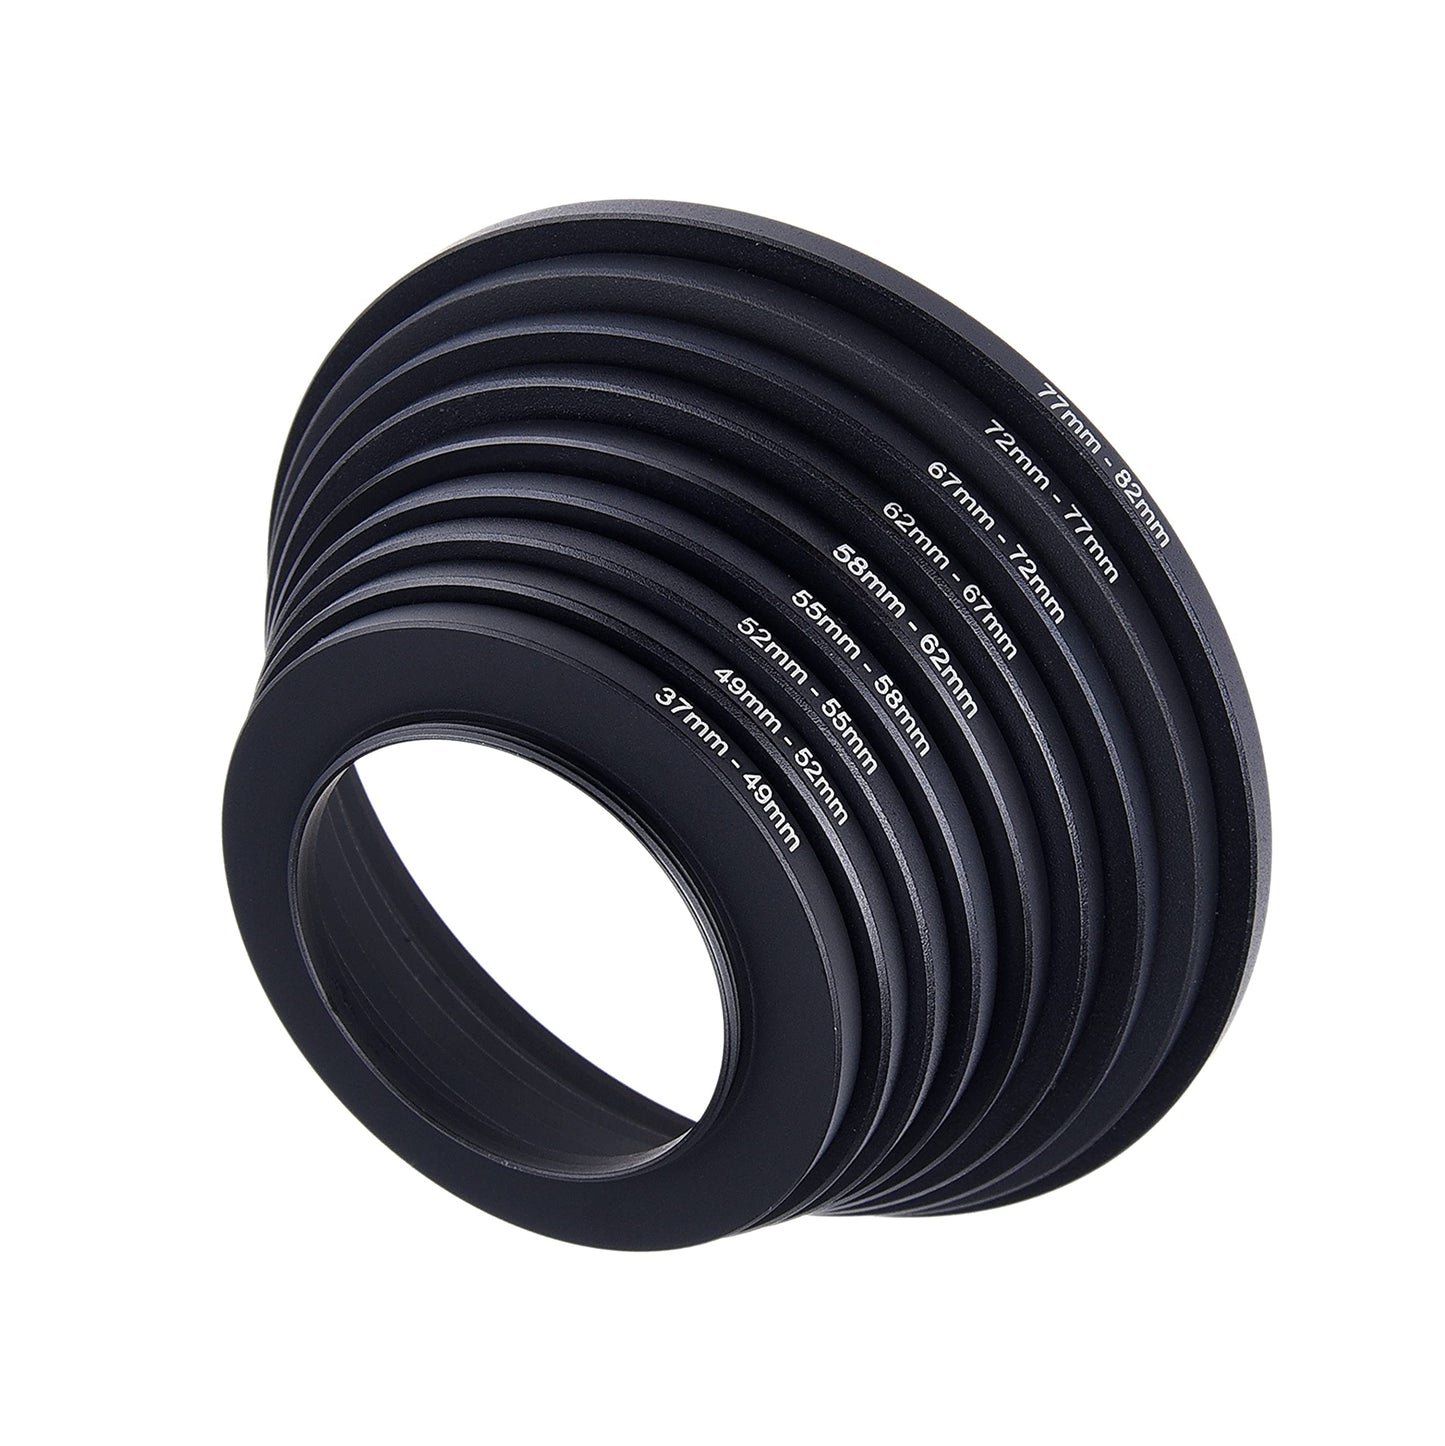 Lens Filter Adapter Rings - Allows you to set large lens filters on a smaller diameter lens - sizes: 37-49, 49-52, 52-55, 55-58, 58-62, 62-67, 67-72, 72-77, 77-82mm